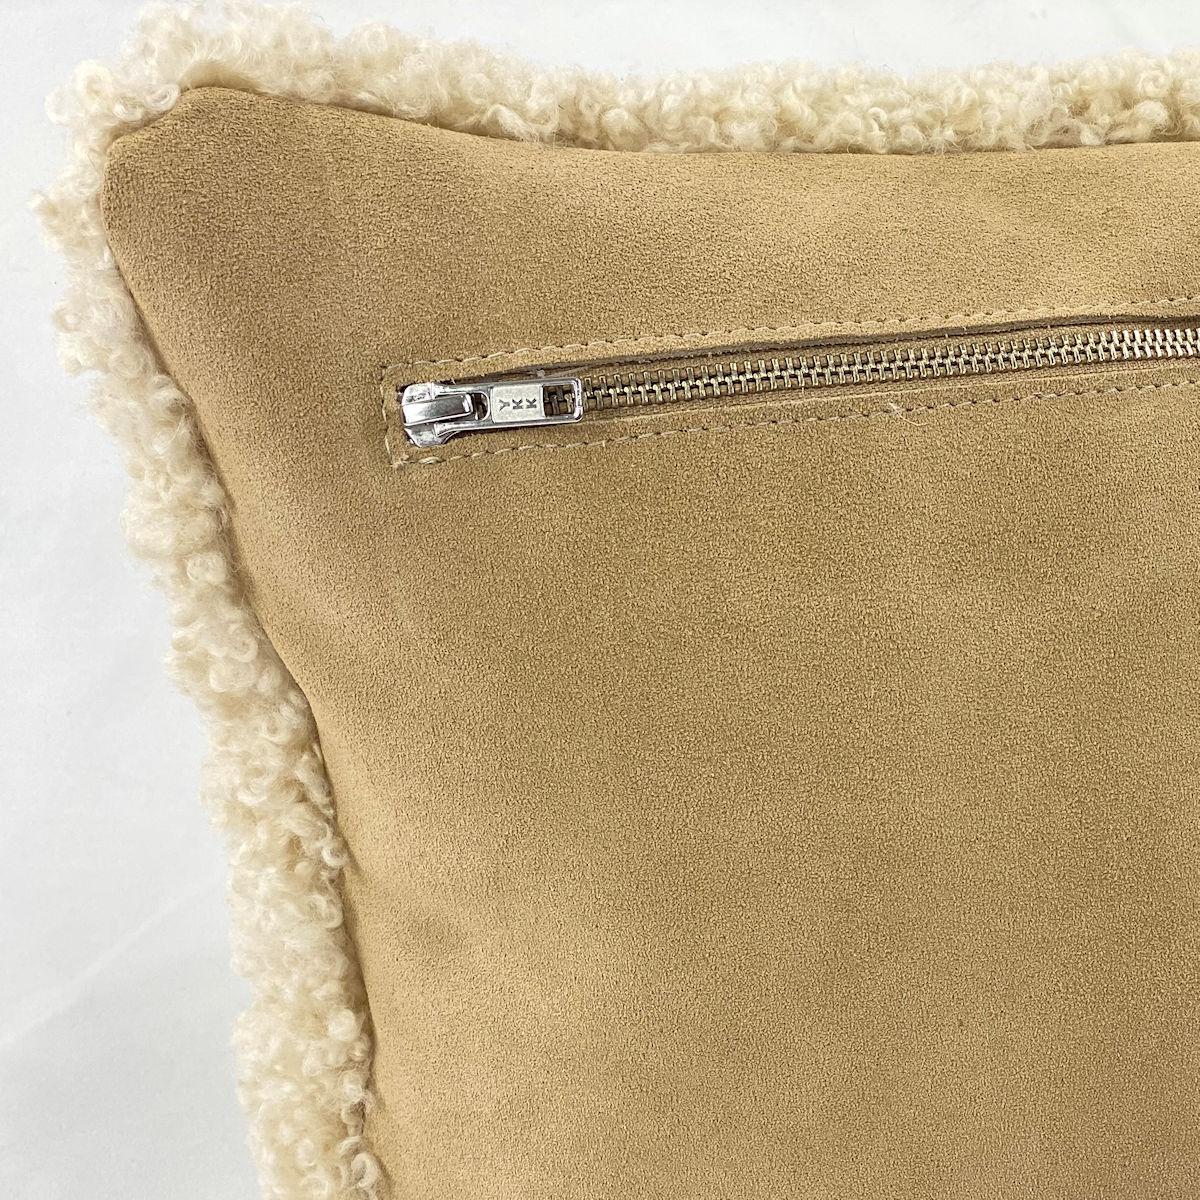 Hand-Crafted Shearling Sheepskin Pillow, Dark Linen Boucle - 35x50cm For Sale